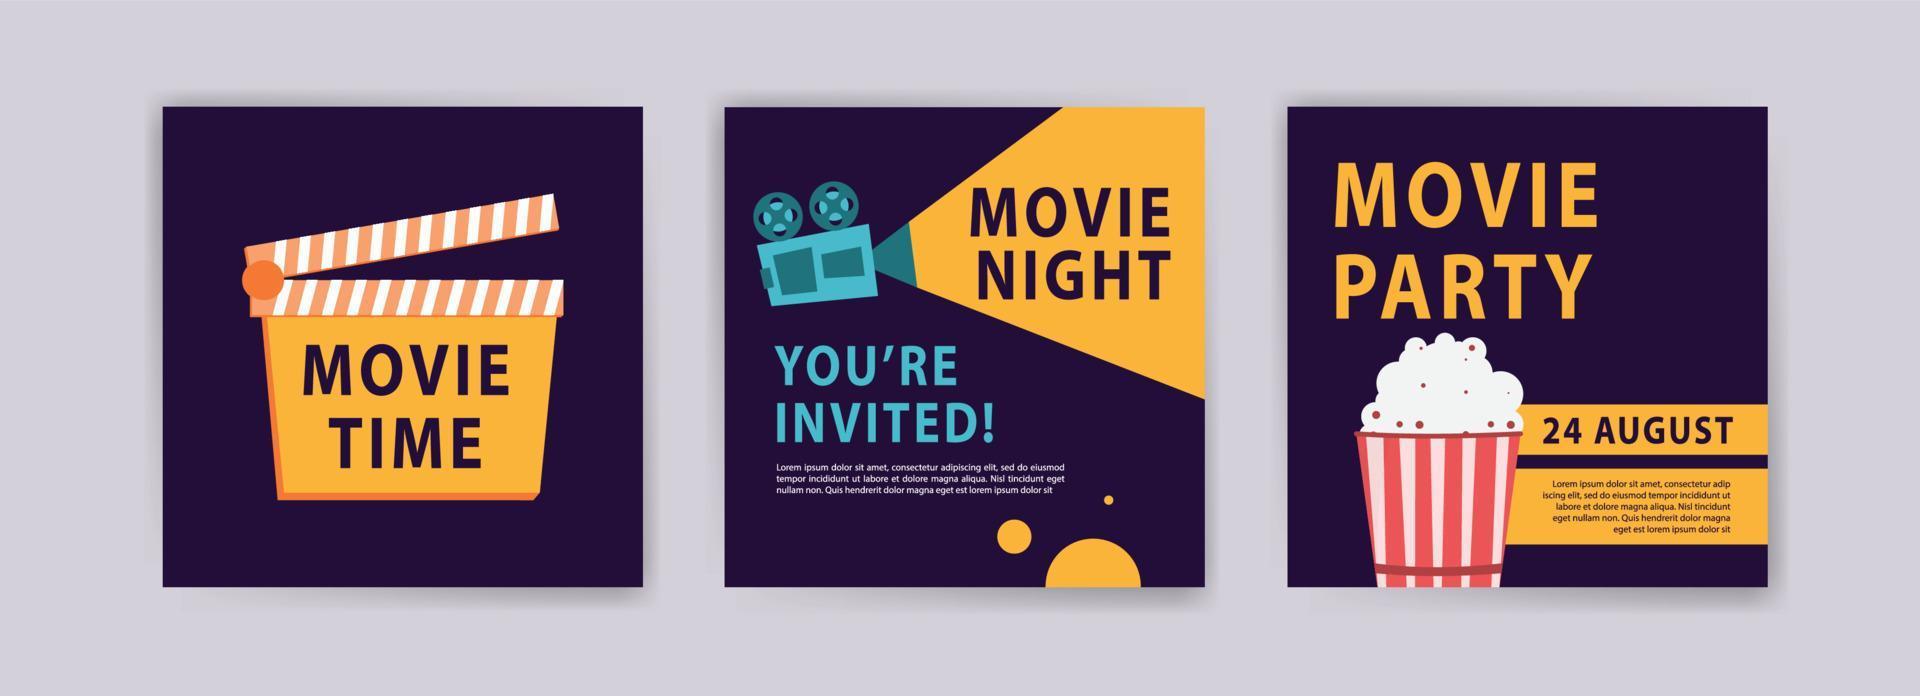 Movie time. Movie night. Movie Party. Cinema poster template. Templates for banners, social media post ads, cards and posters. vector